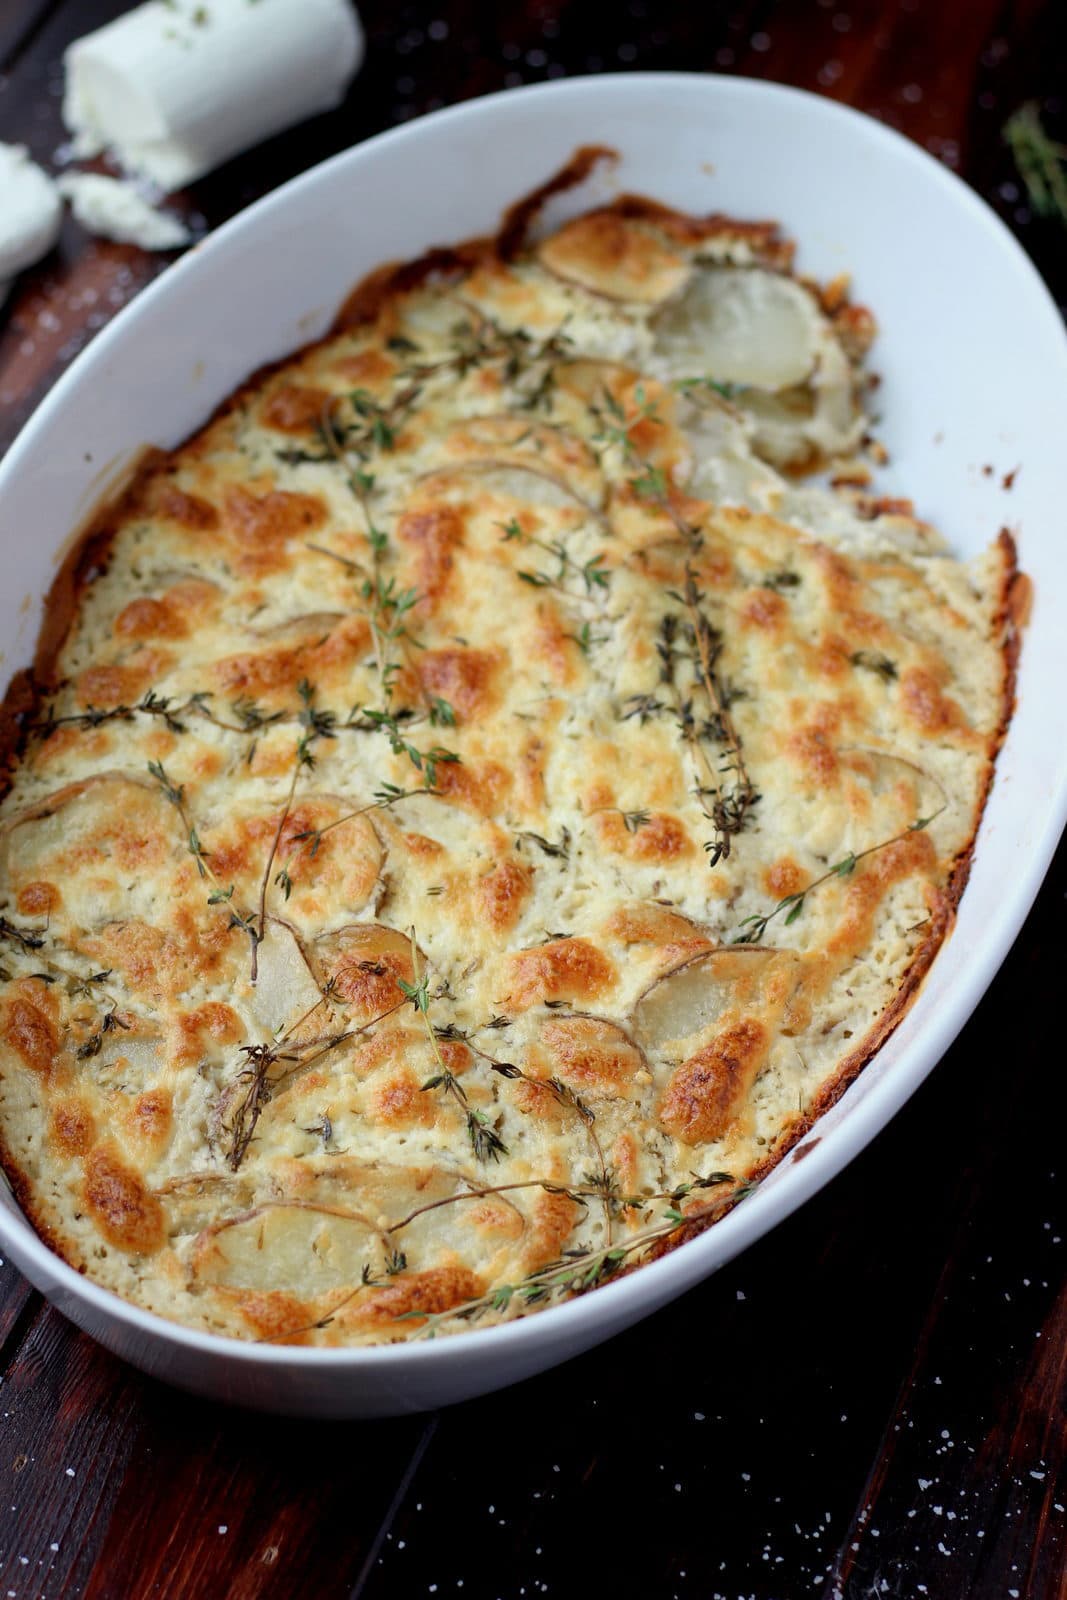 Goat Cheese Potatoes Au Gratin + Browned Butter and Fresh Thyme - awesome Thanksgiving recipe! thewoodenskillet.com #foodphotography #foodstyling